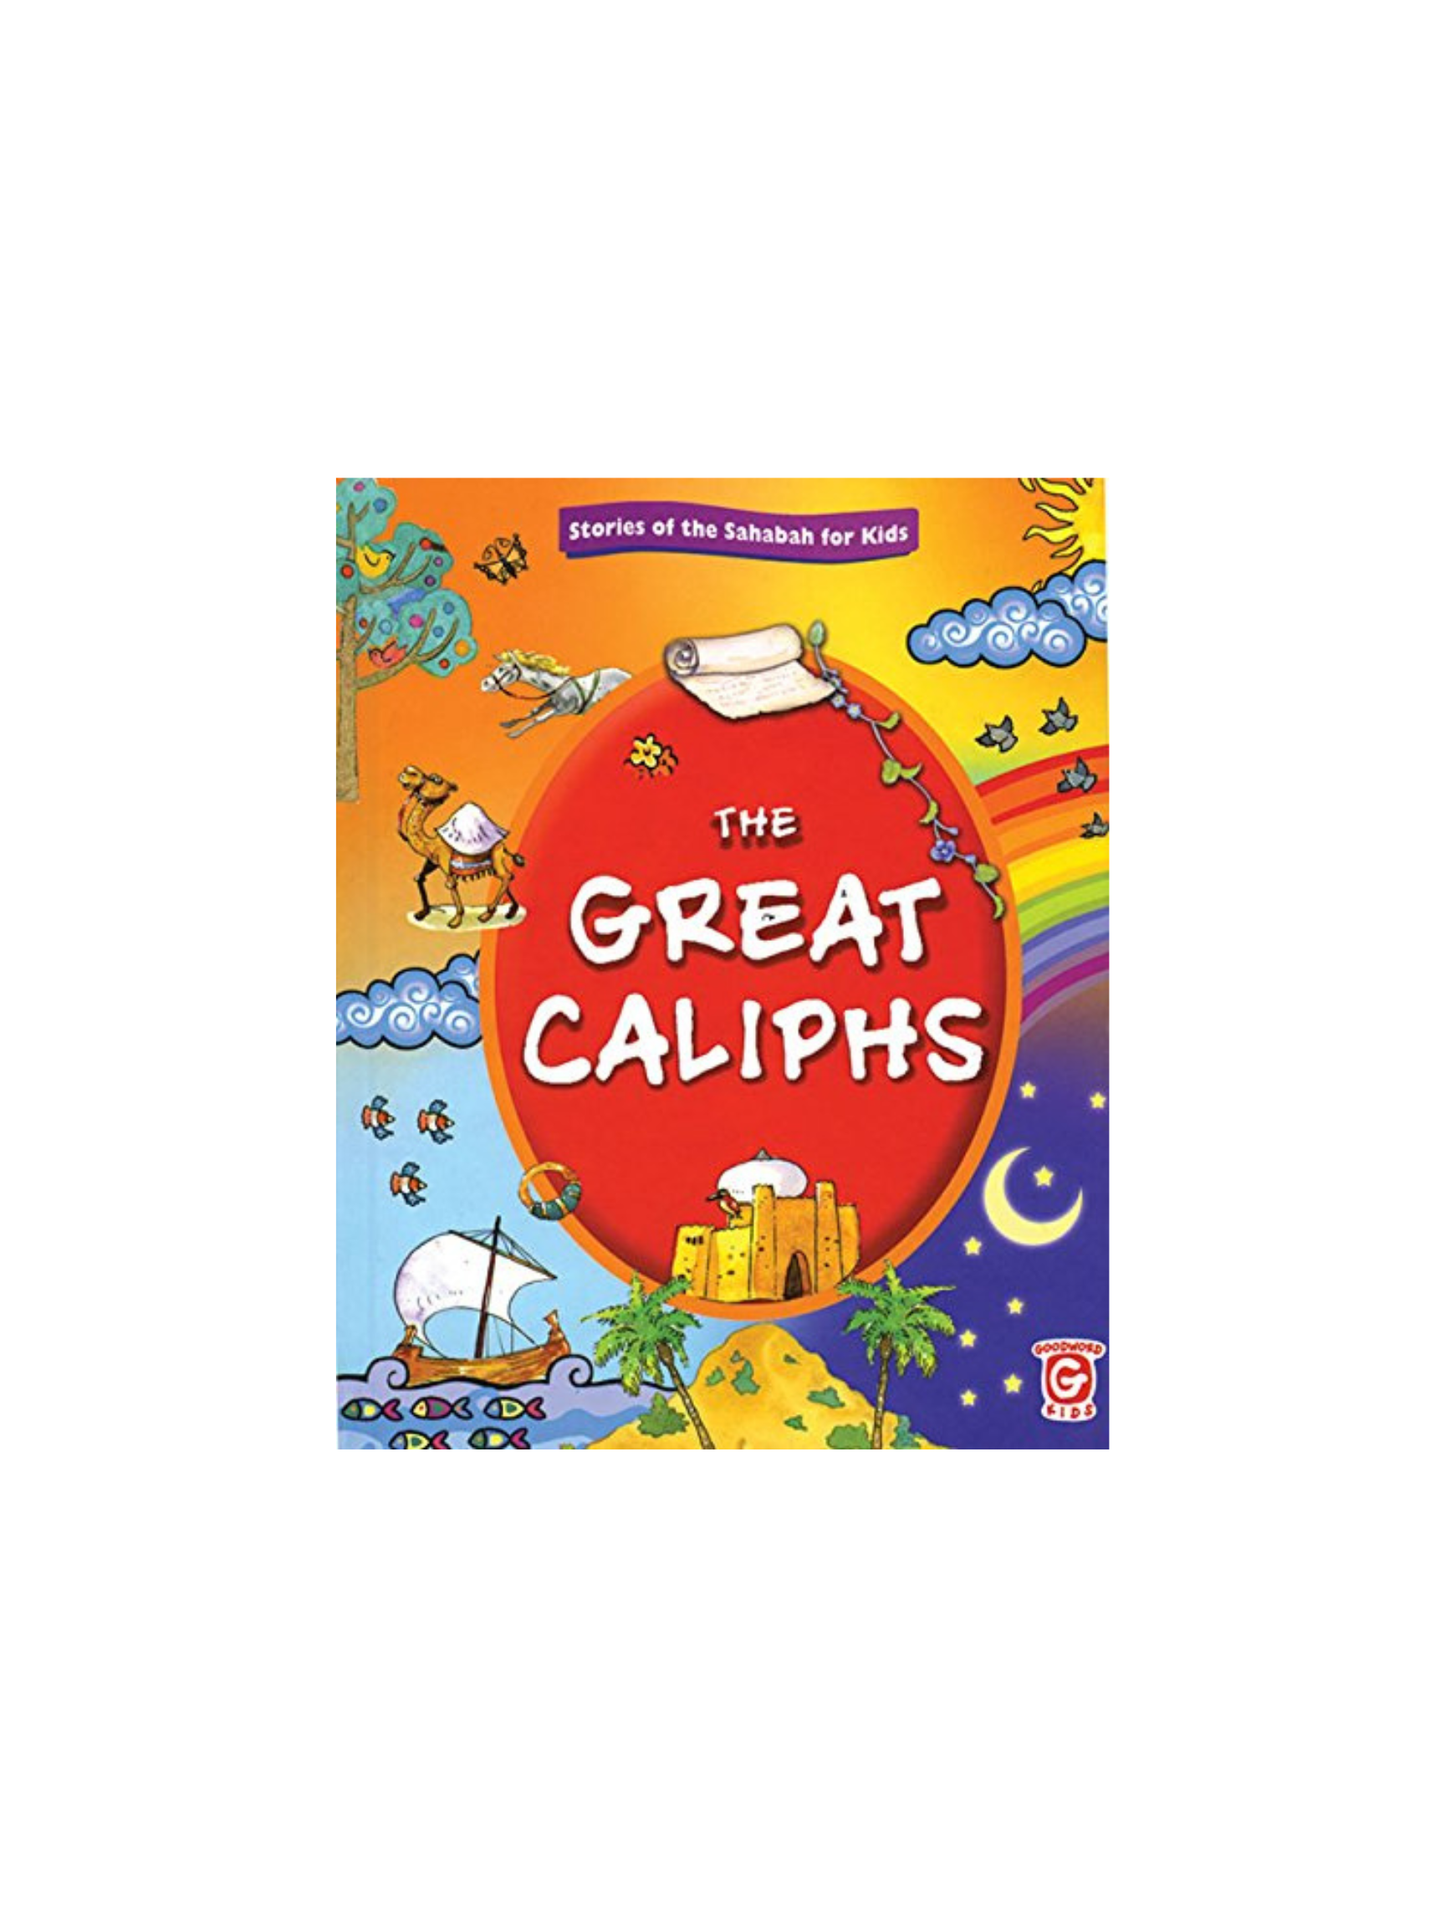 THE GREAT CALIPHS